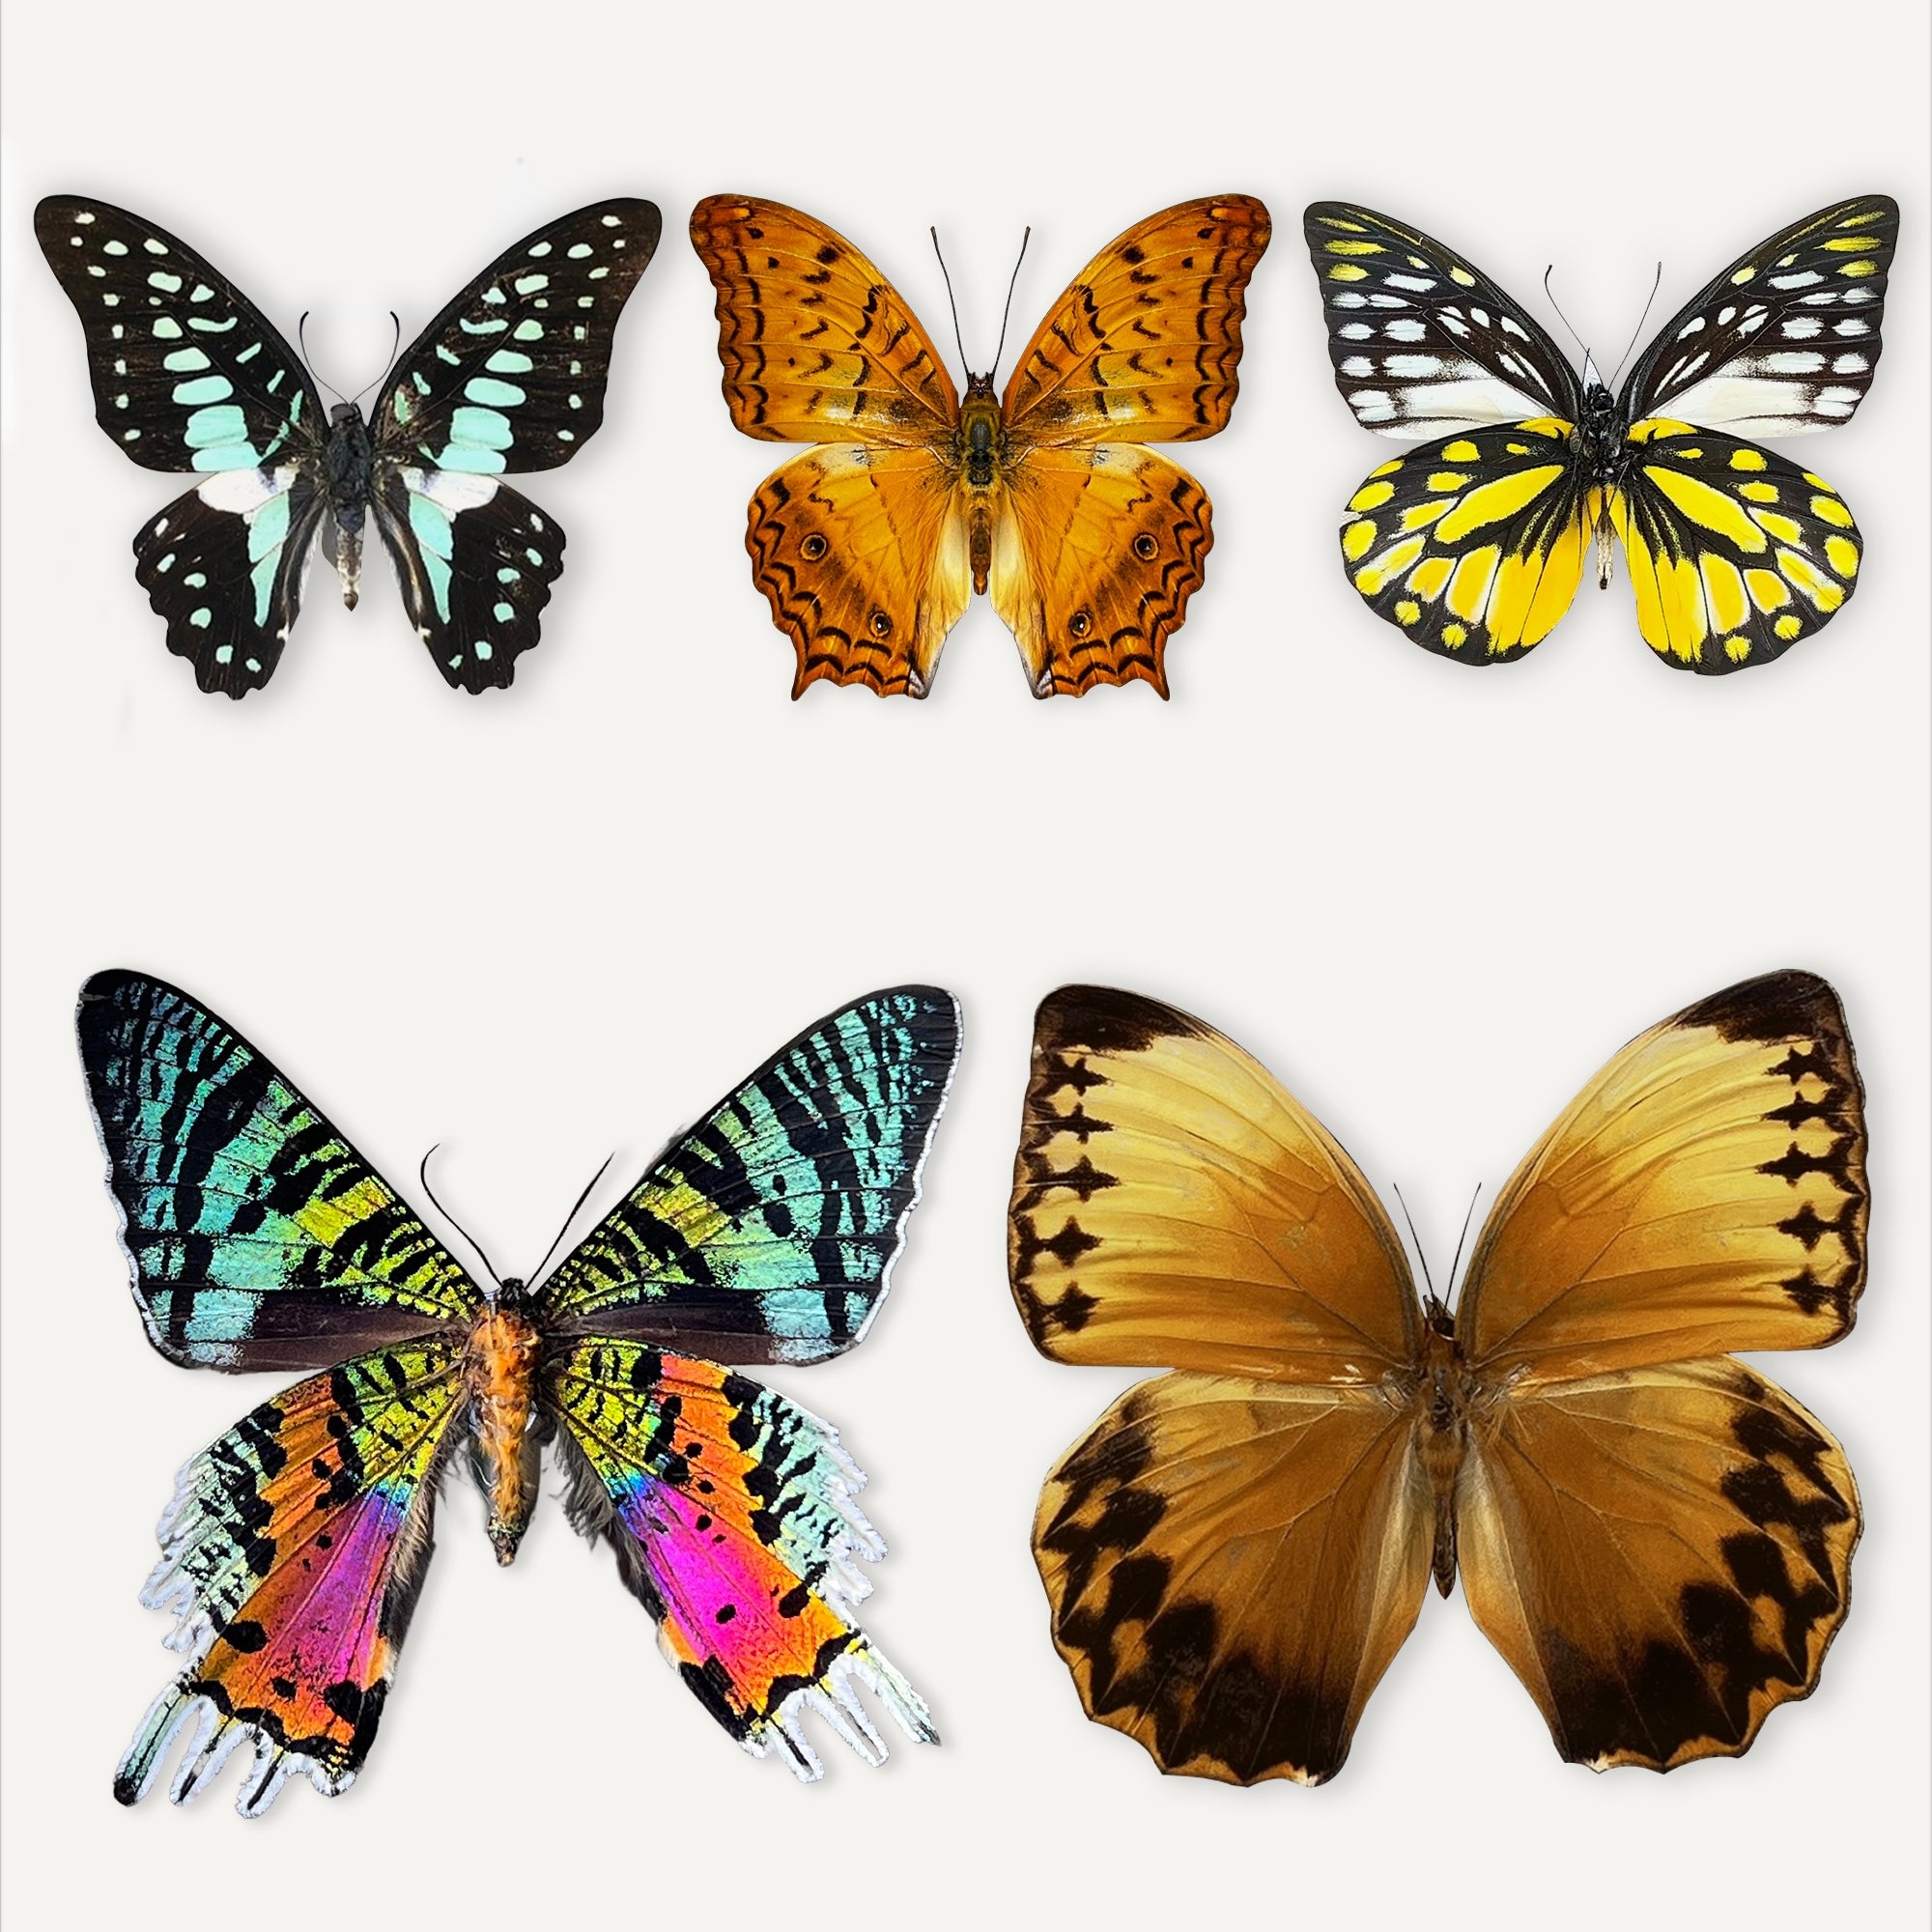 5 Real Butterfly Specimen Collection Butterflies Mounted Dead Animal Preserved Entomology Taxidermy Oddity Scientific Lover Insect Office Desk Art Artwork Display UM-25-A1